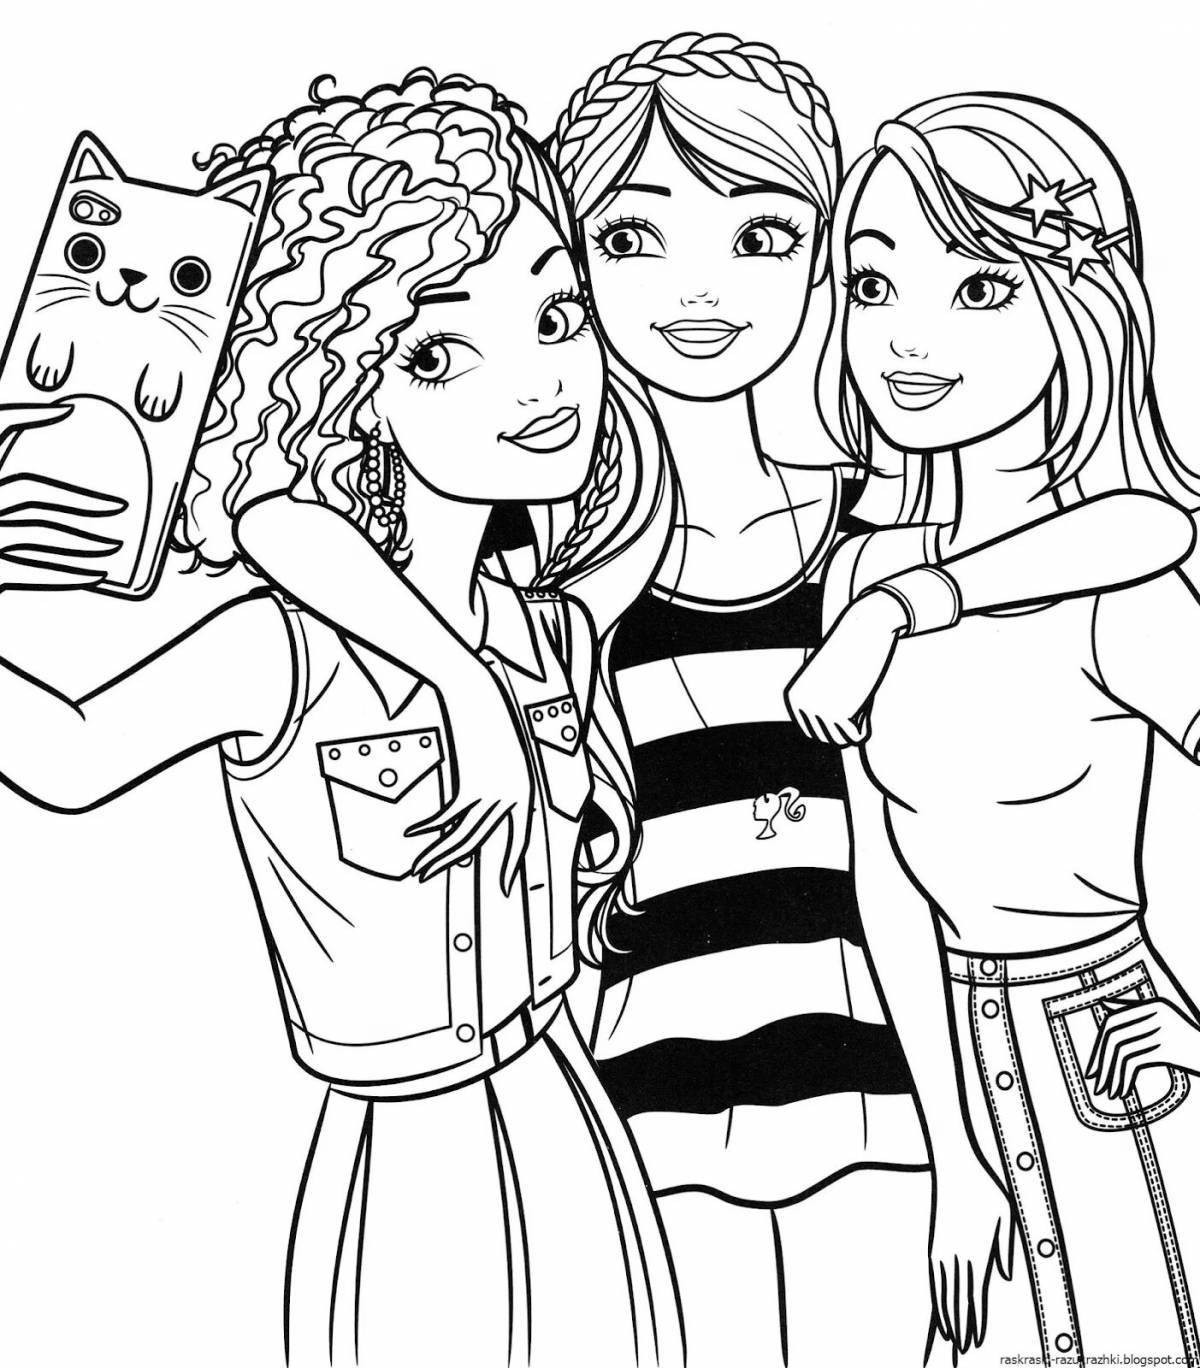 Adorable coloring book for girls cool for 7 years